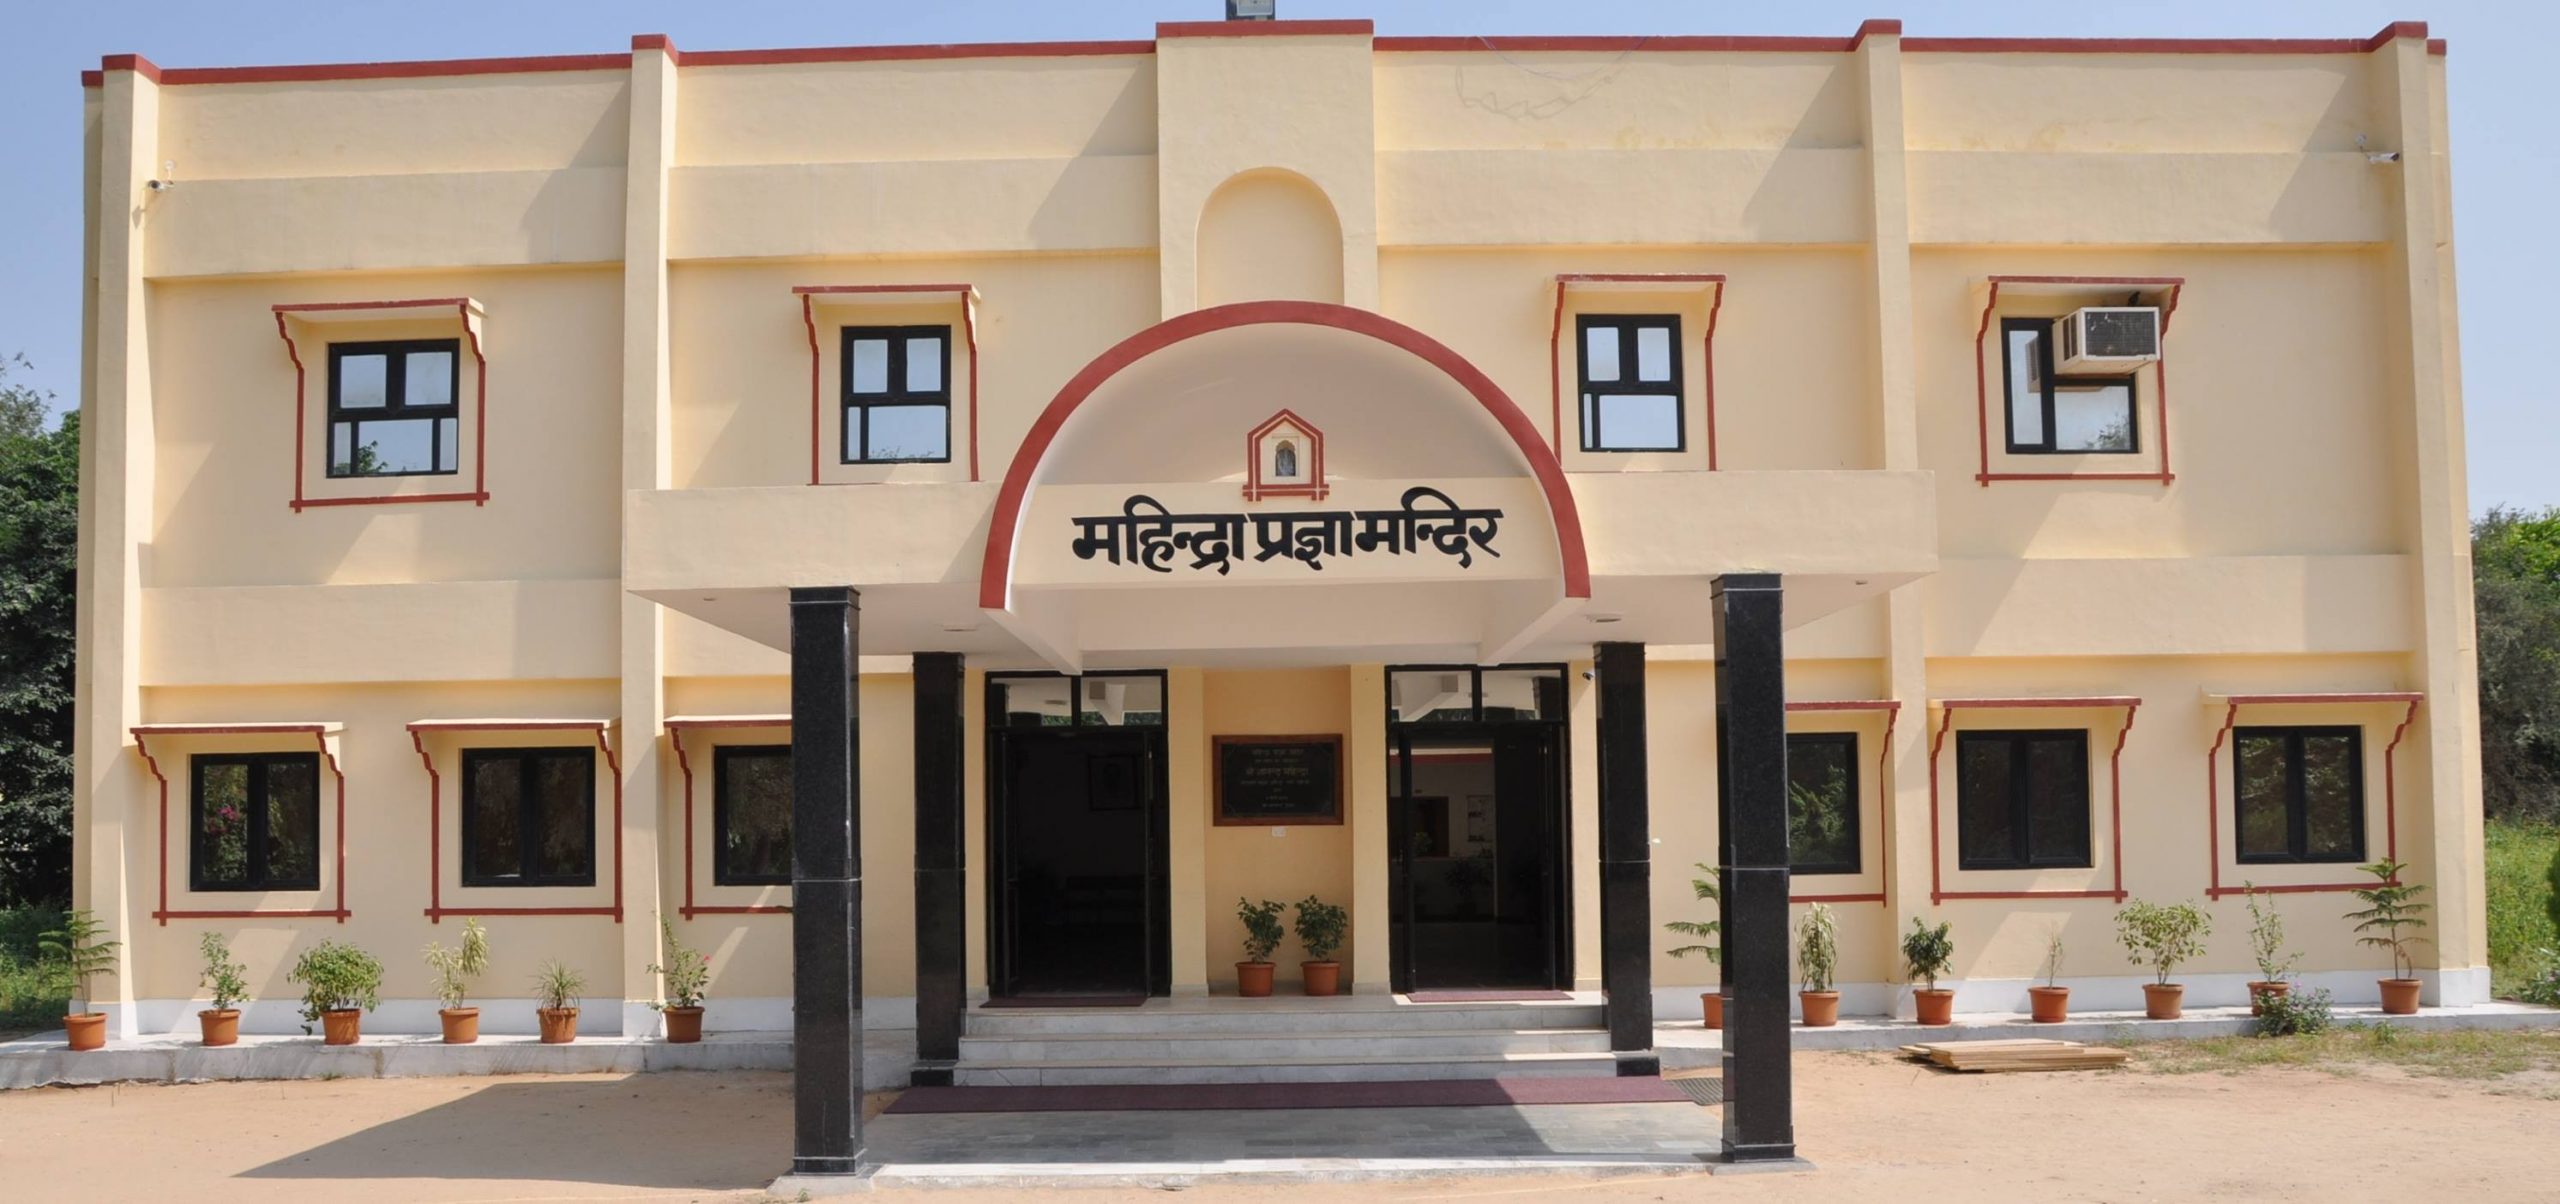 Banasthali University Admission 2021 Courses Fees Structure Placement Admission Advice